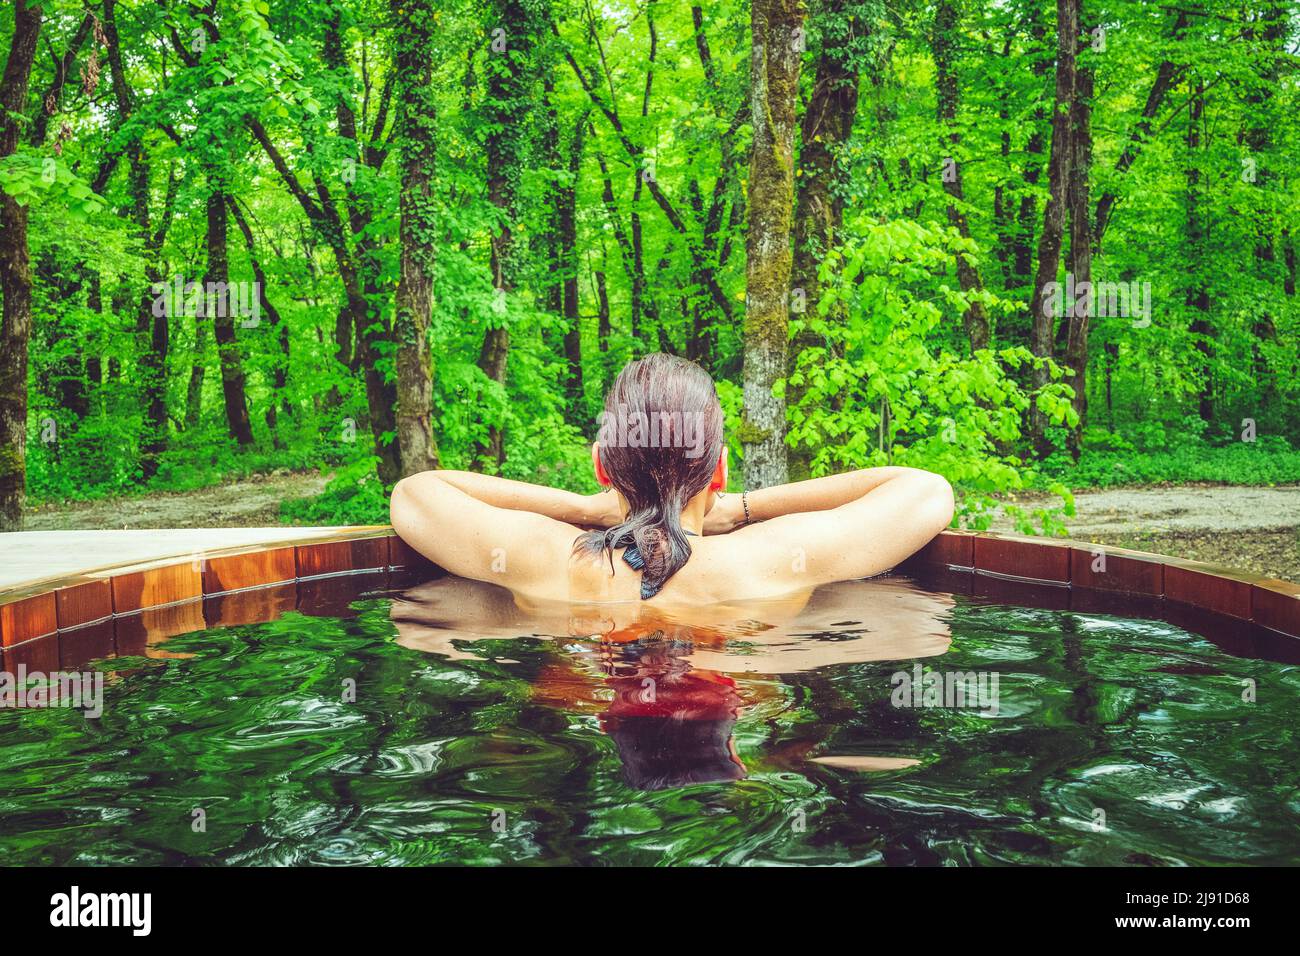 Beautiful woman in nordic bath in front of a forest. Stock Photo